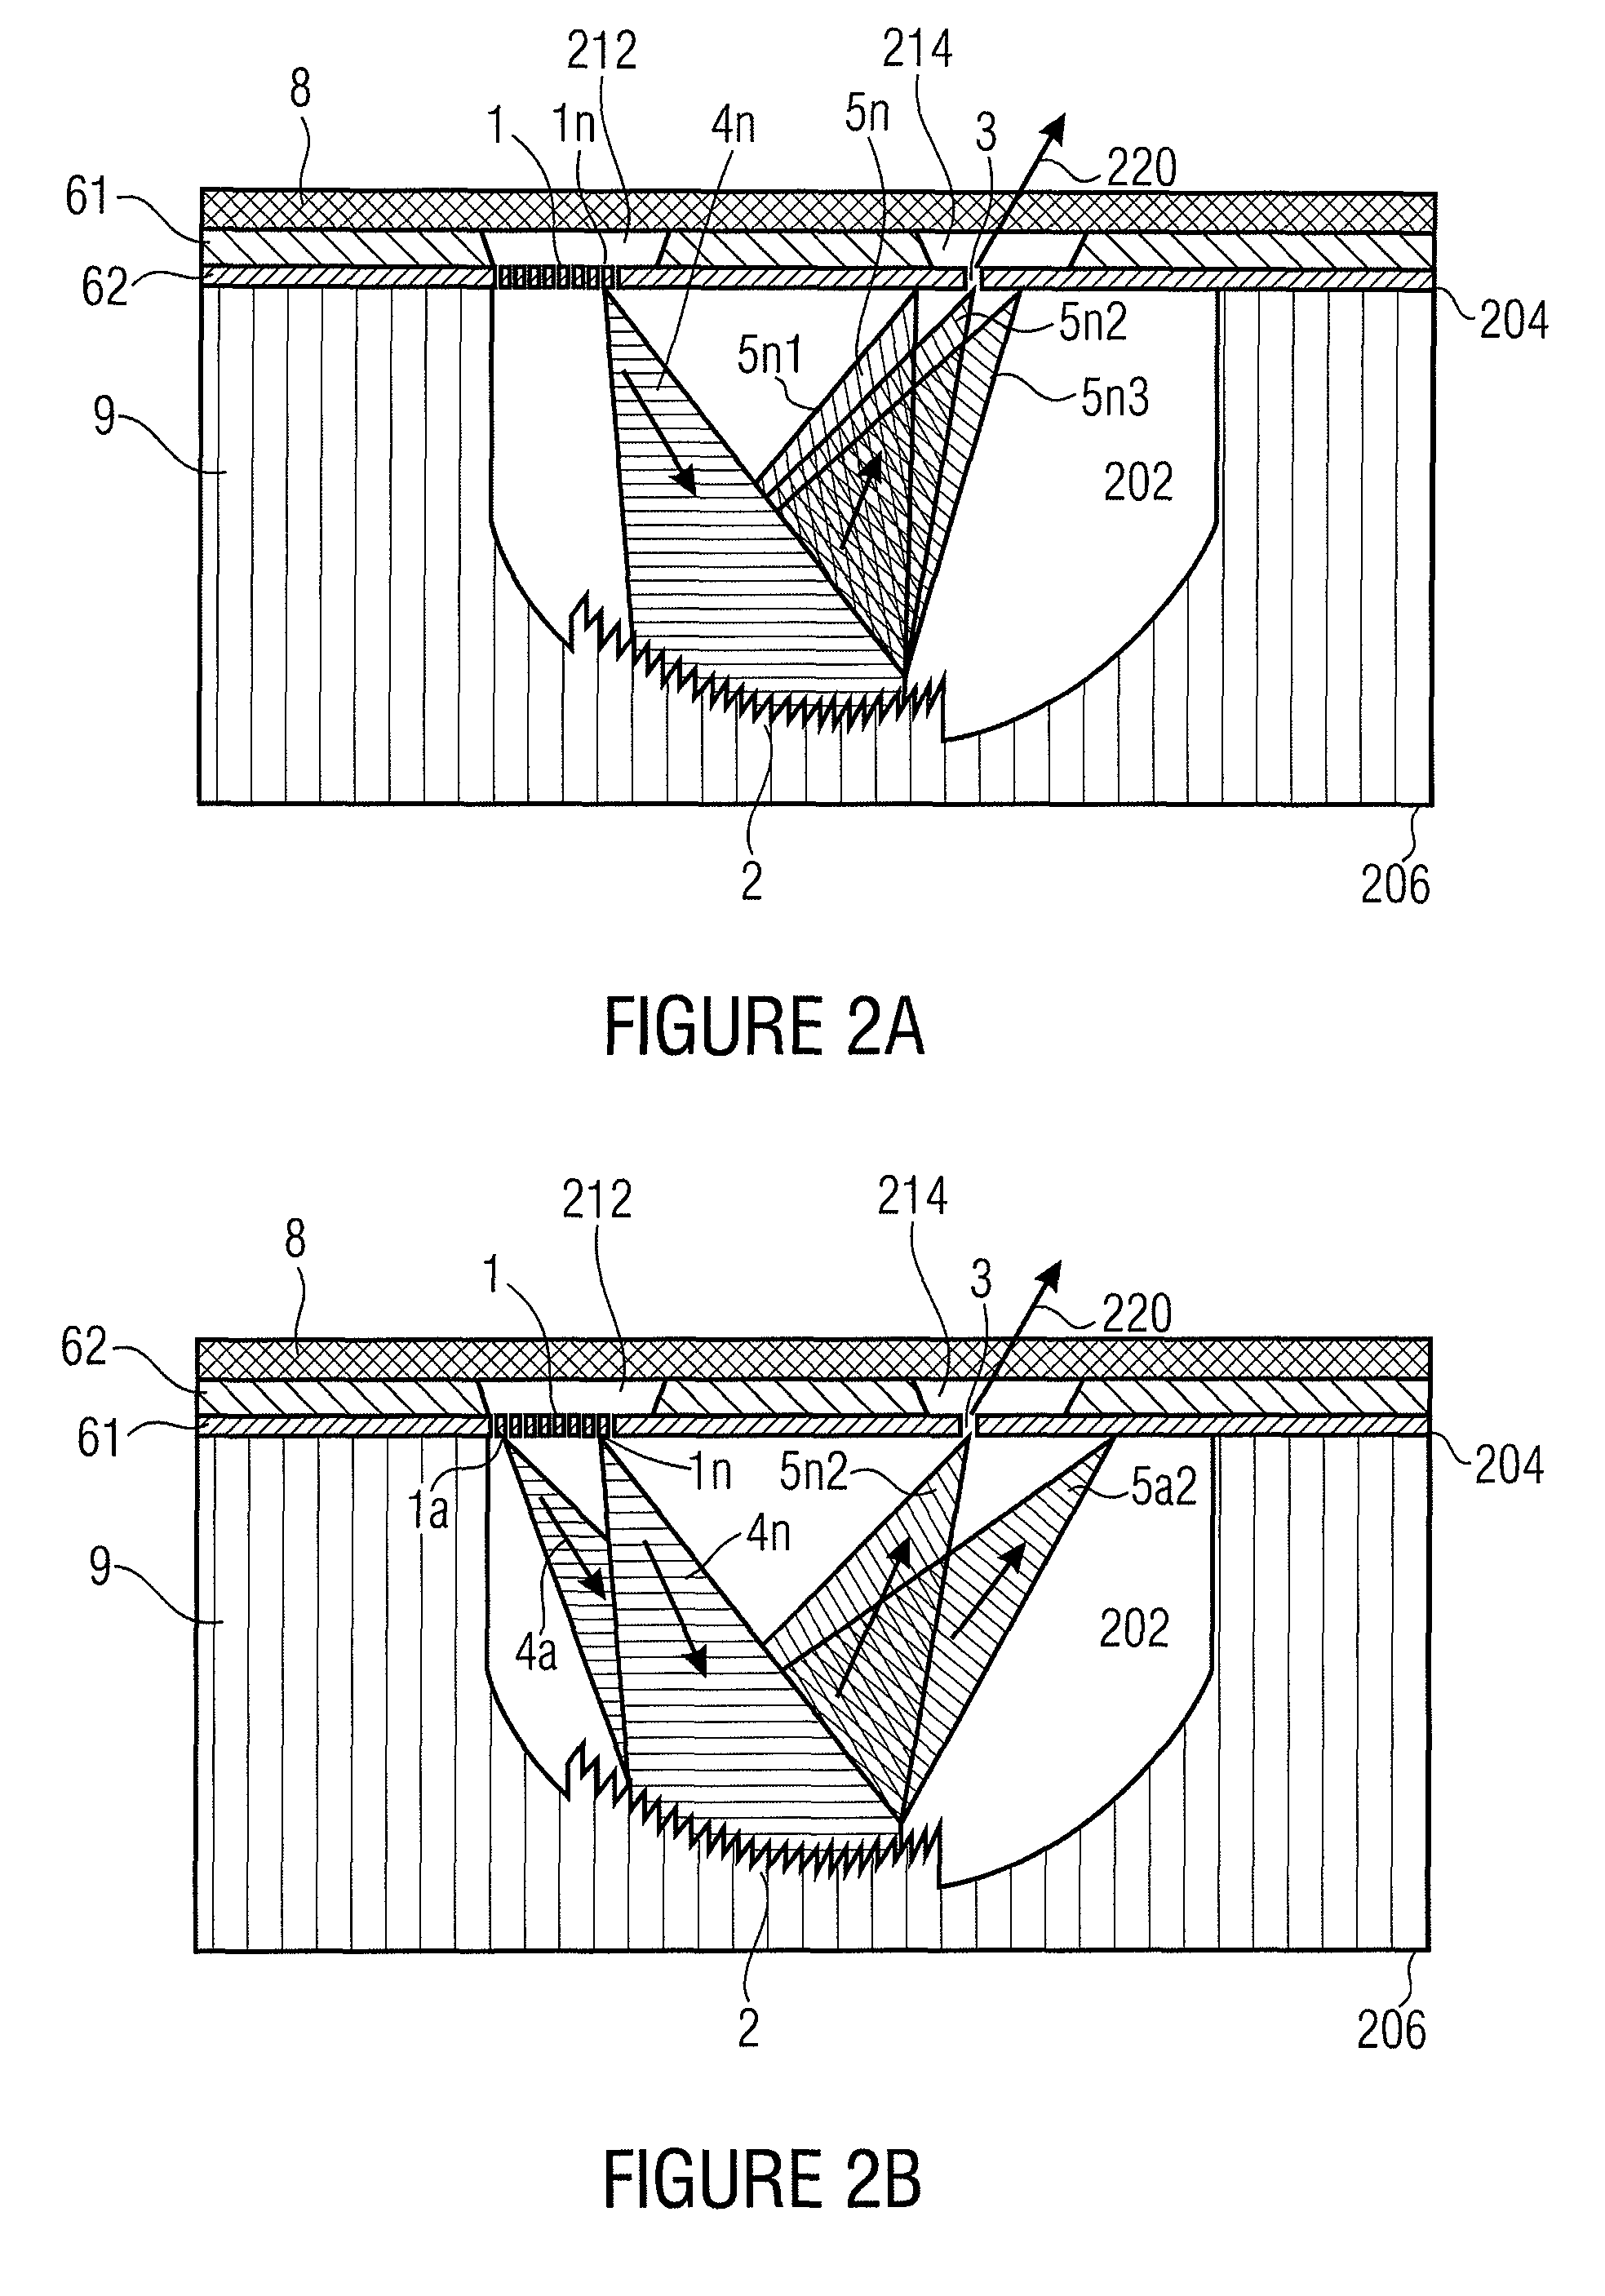 Radiation generation device for generating electromagnetic radiation having an adjustable spectral composition, and method of producing same